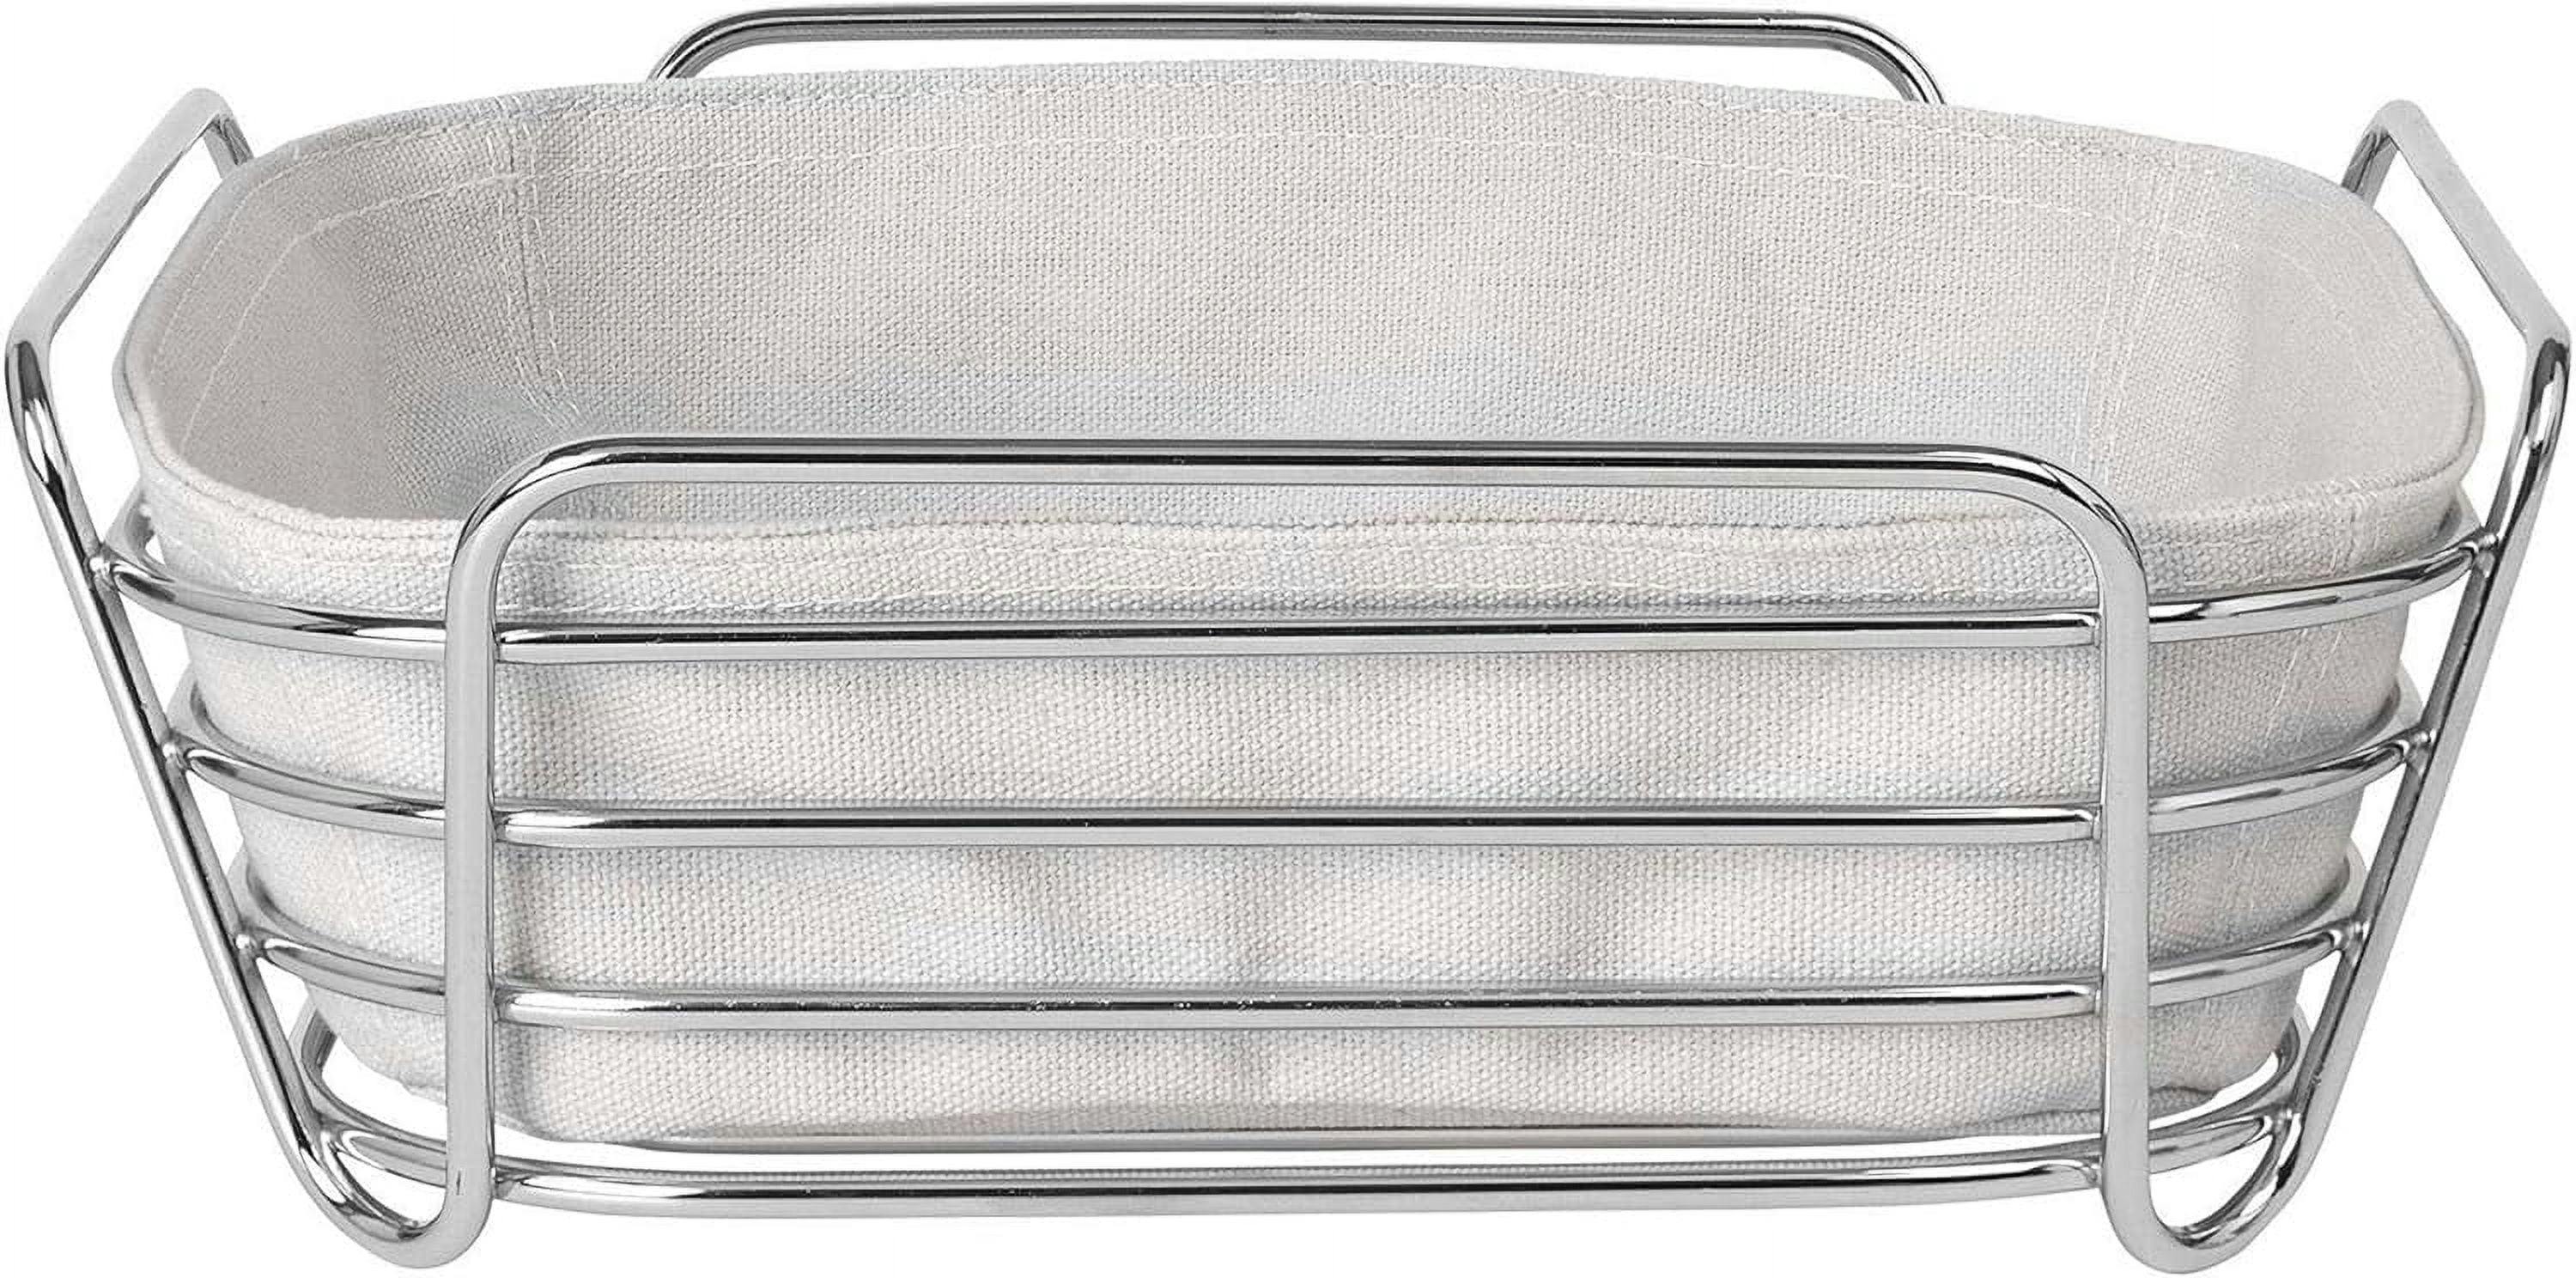 Moonbeam-Cream Chrome-Plated Steel Wire Bread Basket with Cotton Liner